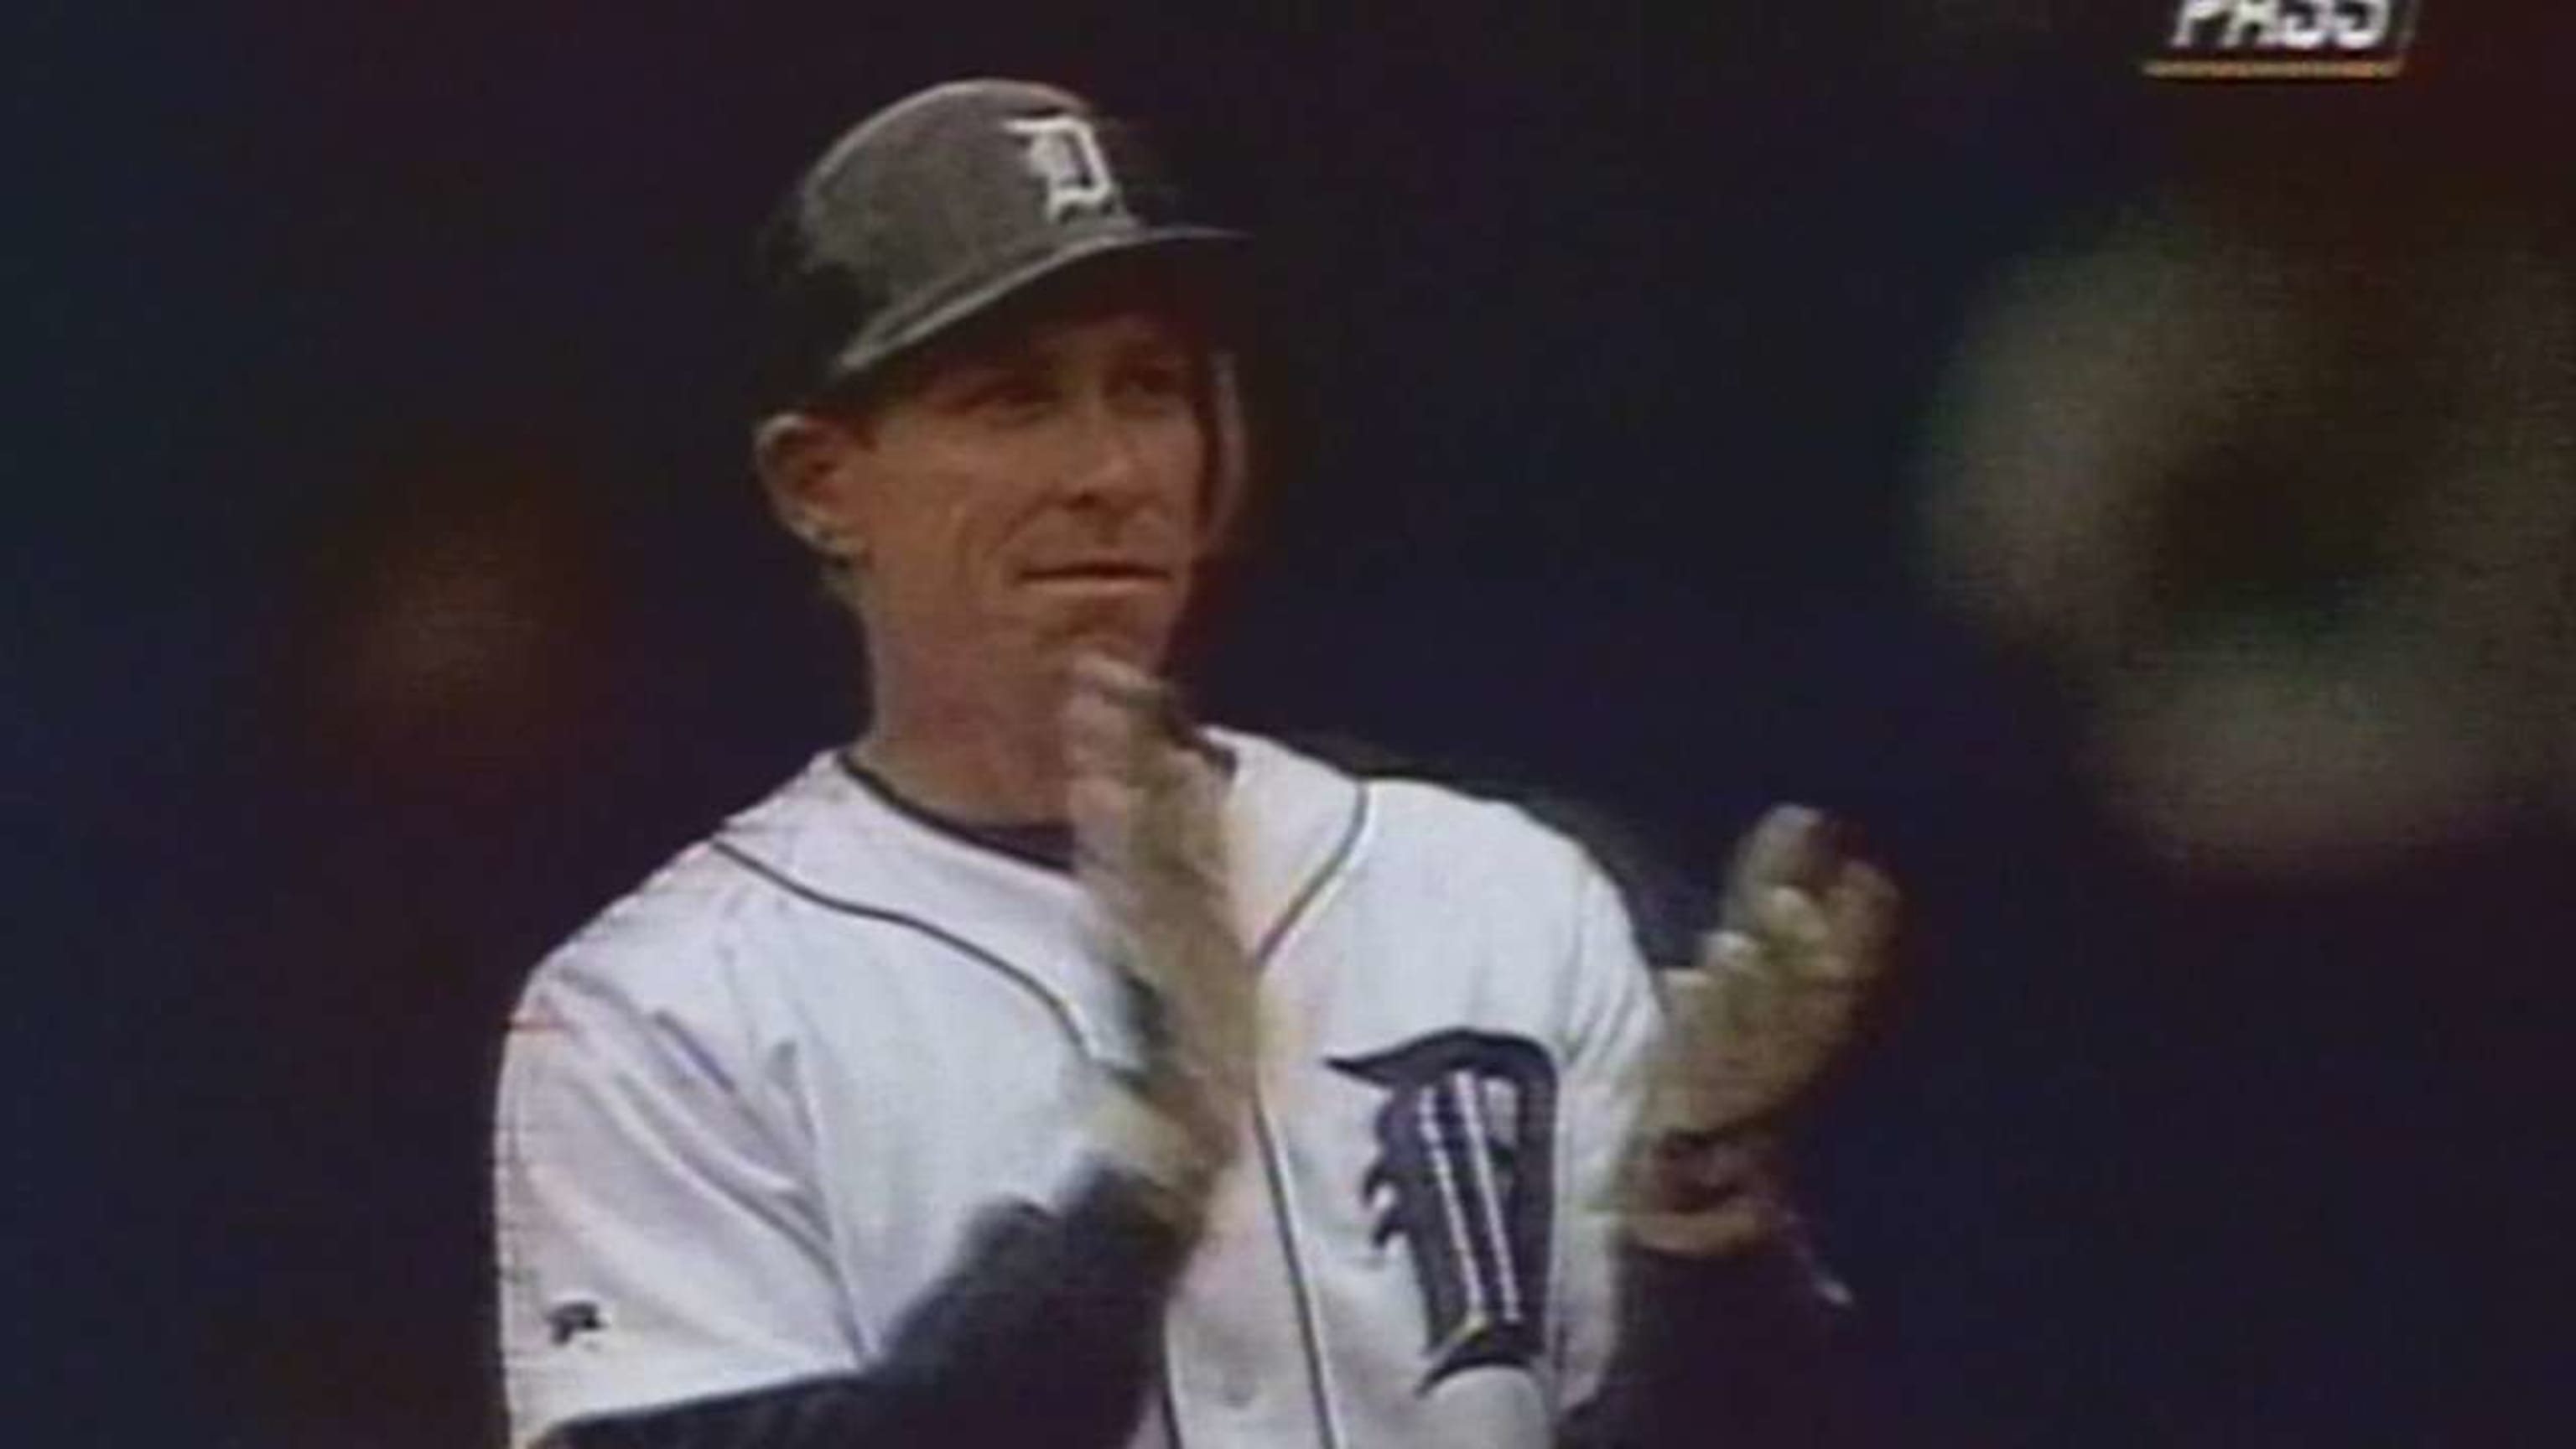 If Trammell, Whitaker ever go in to Hall of Fame, they'd prefer